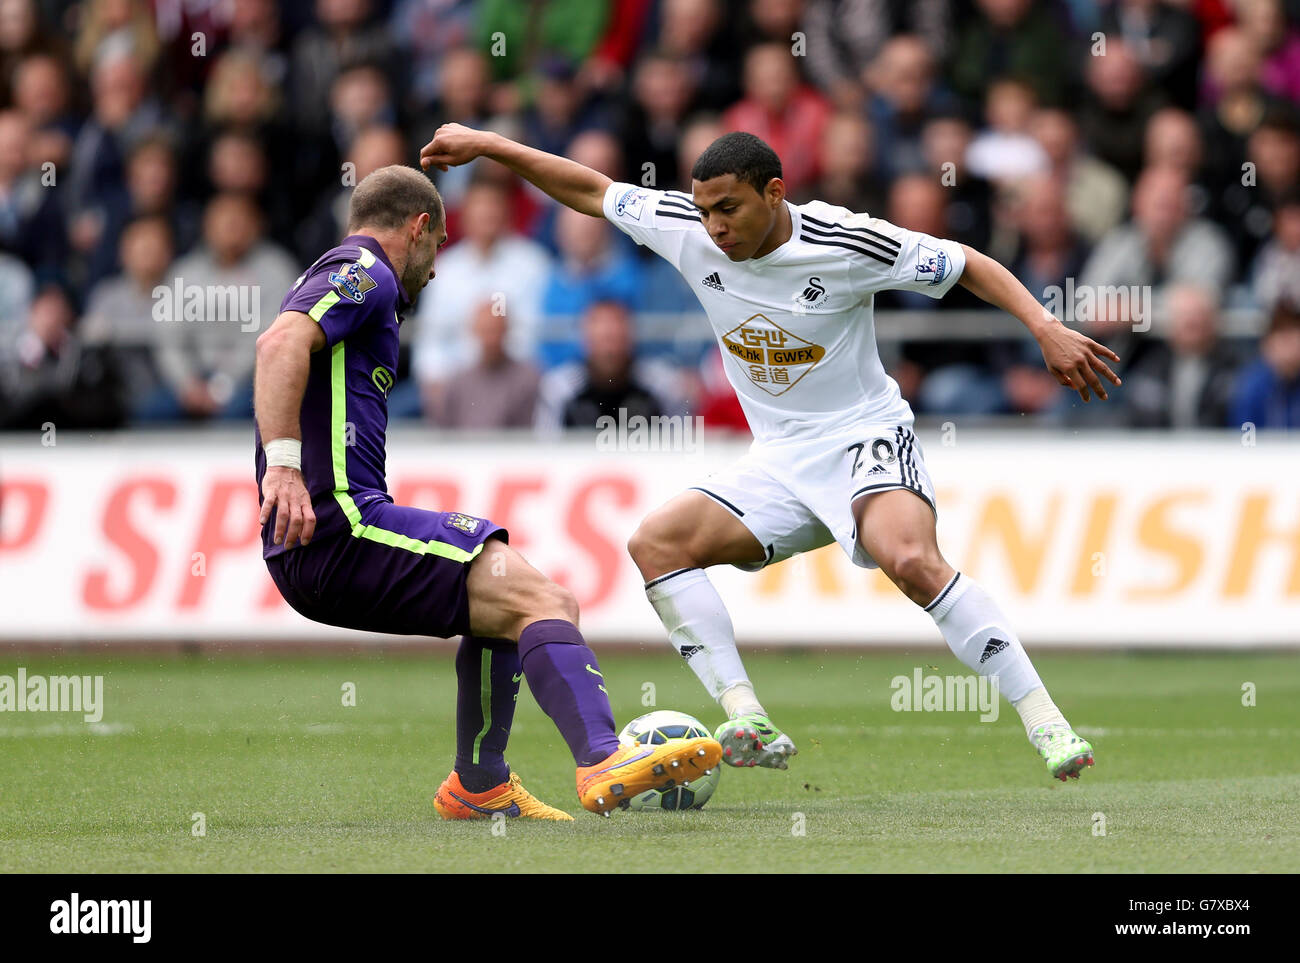 Swansea City's Jefferson Montero (right) and Manchester City's Pablo Zabaleta battle for the ball during the Barclays Premier League match at the Liberty Stadium, Swansea. PRESS ASSOCIATION Photo. Picture date: Sunday May 17, 2015. See PA story SOCCER Swansea. Photo credit should read: David Davies/PA Wire. Stock Photo